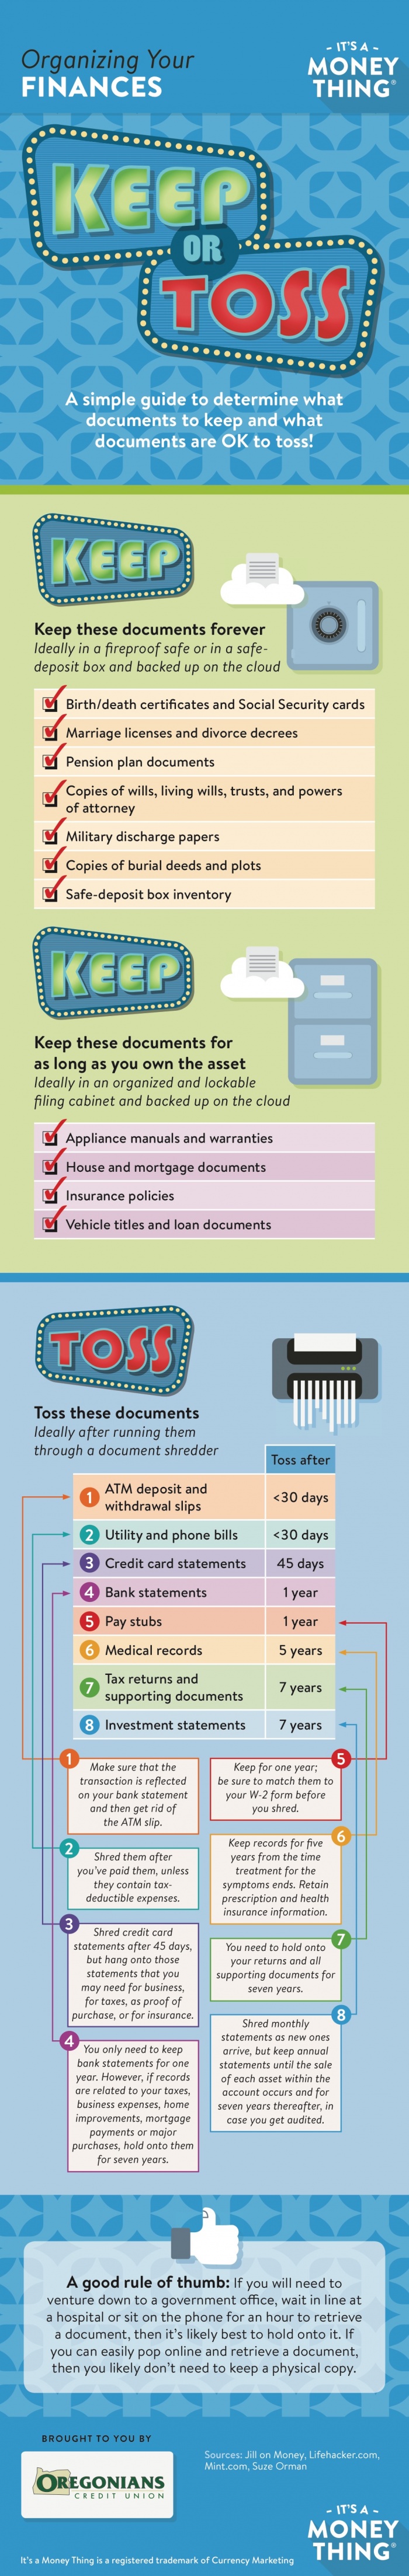 Organizing Your Finances Infographic